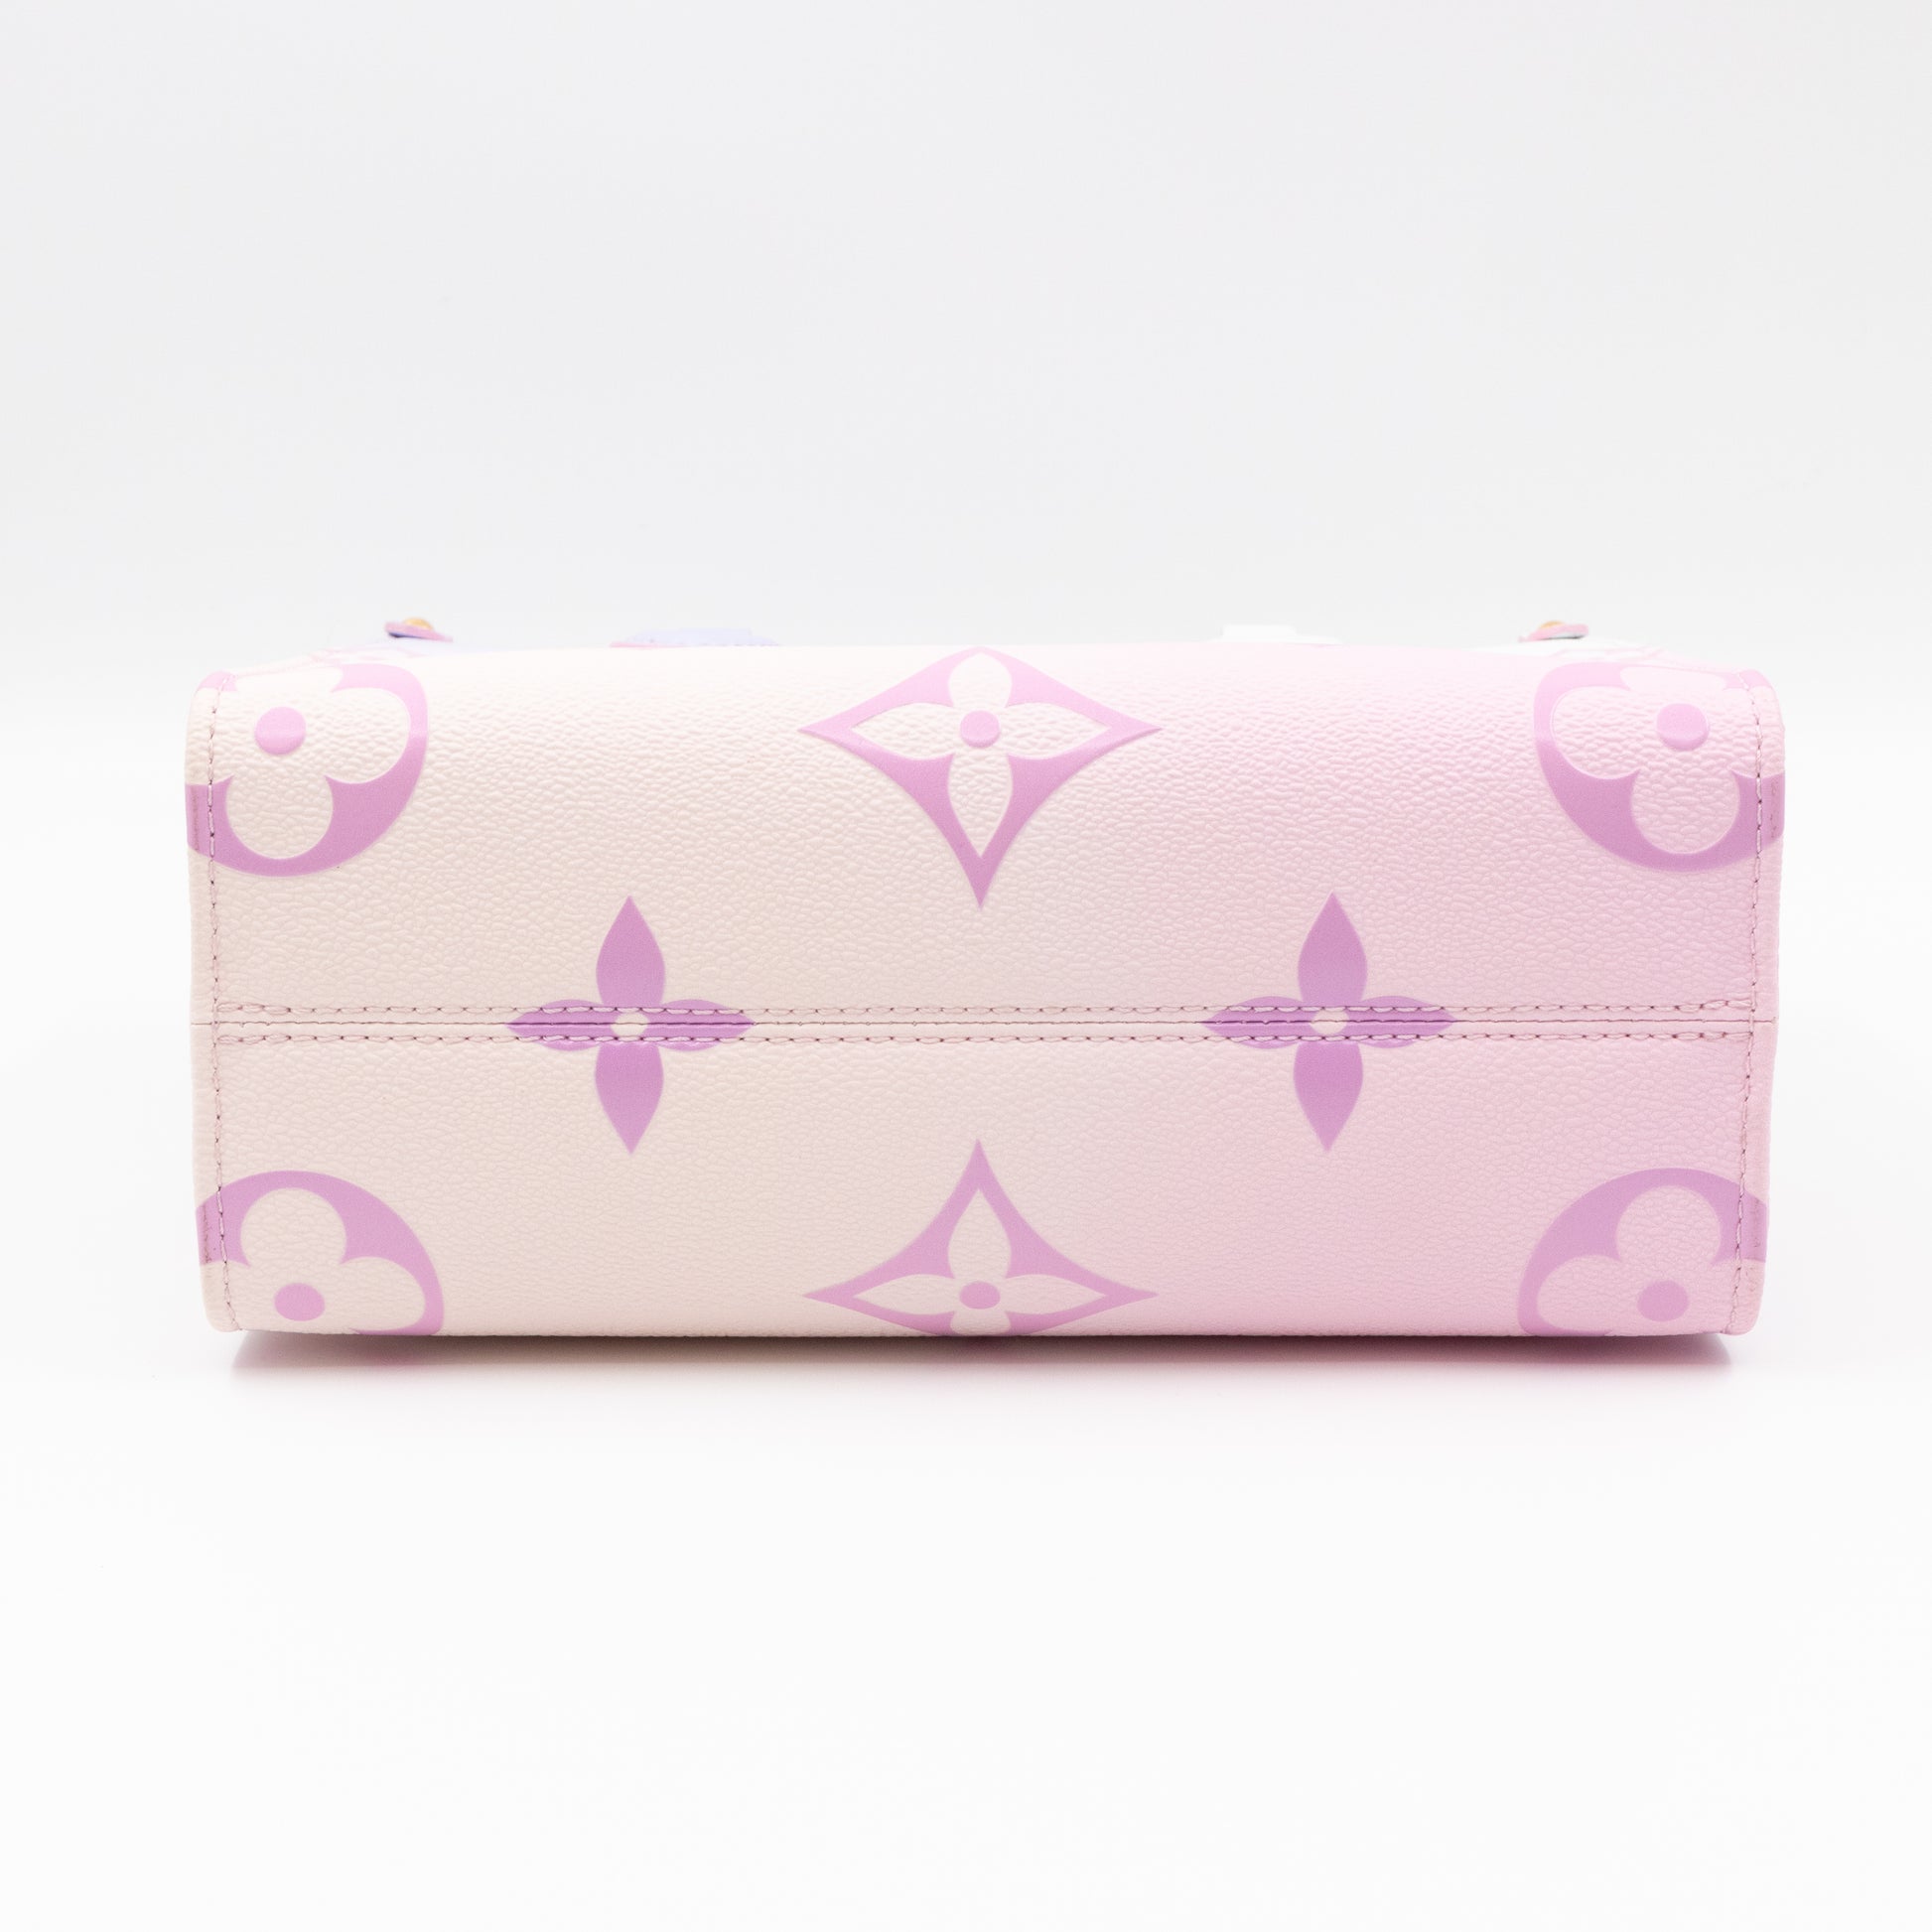 Louis Vuitton – Louis Vuitton Onthego PM Sunrise Pastel Spring in the City  – Queen Station